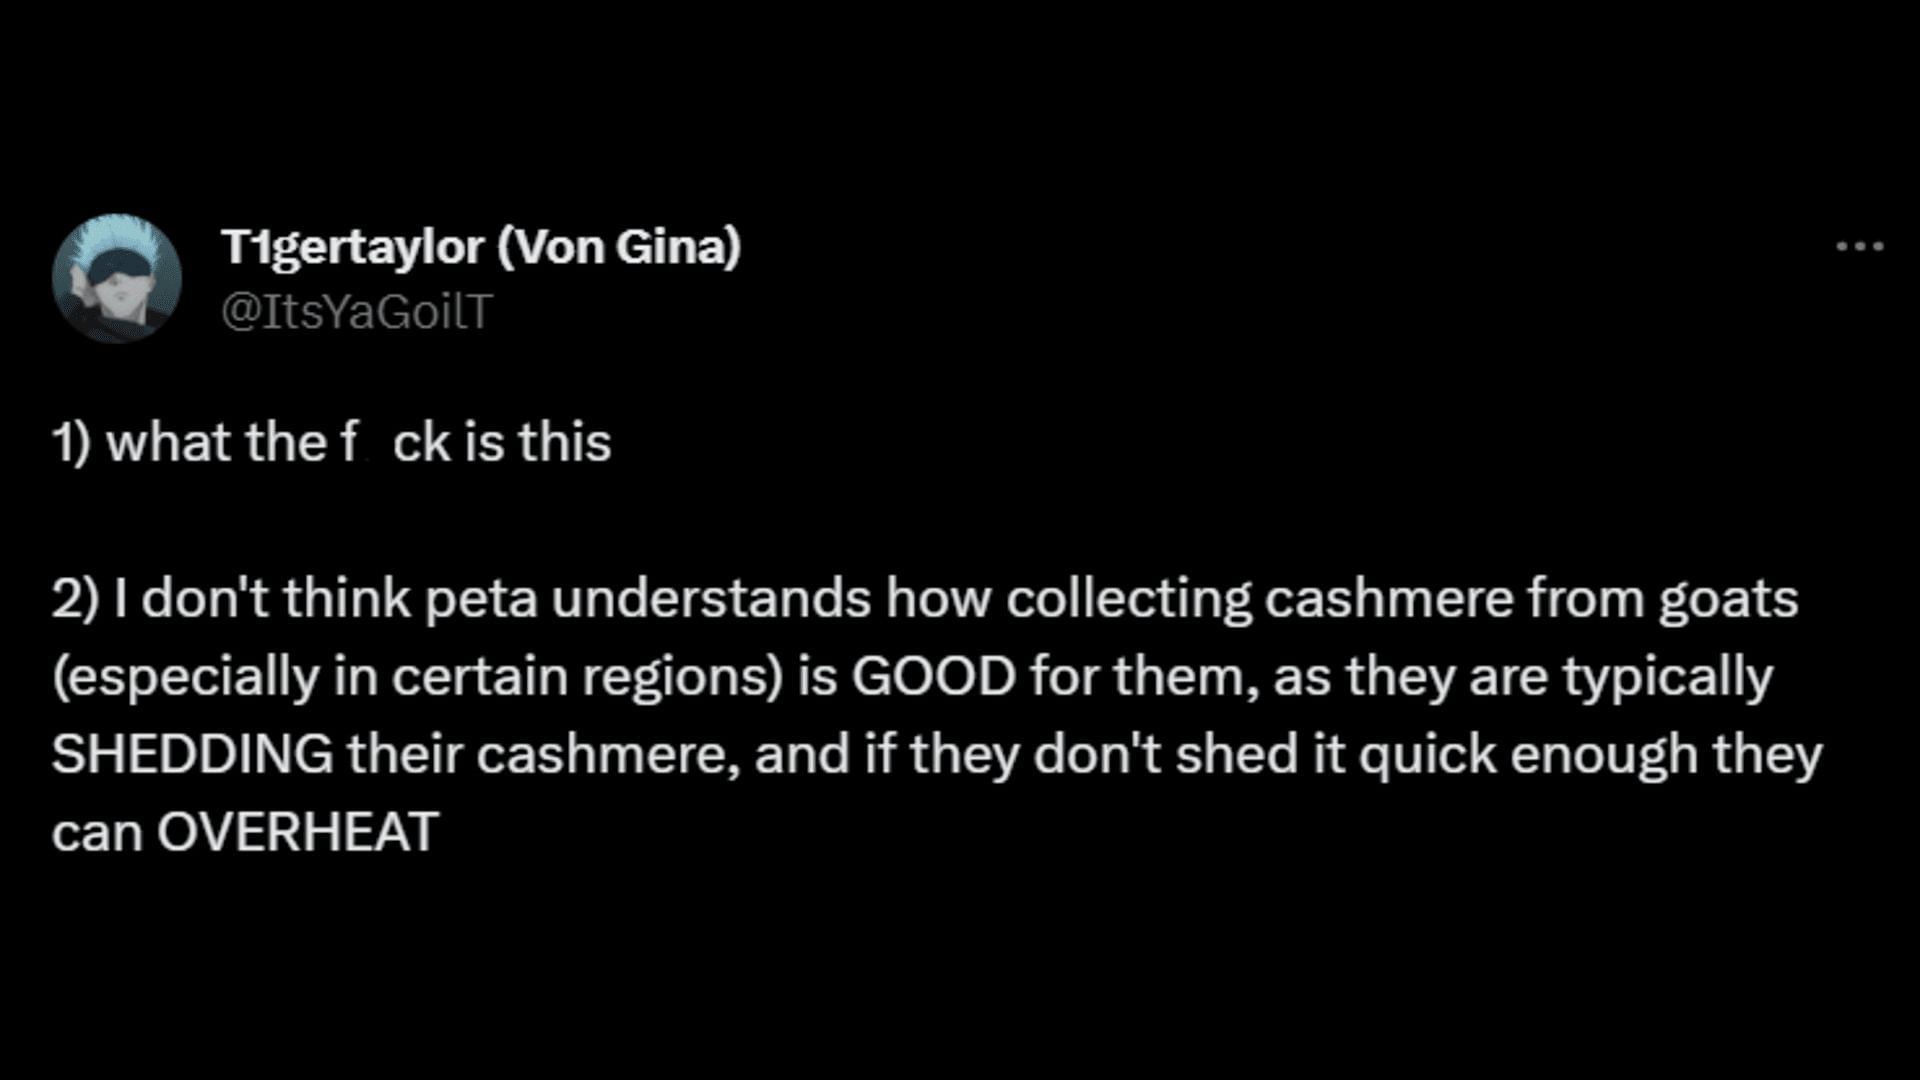 A netizen calls out PETA for being ignorant of the actual process of acquiring the wool. (Image via X/T1gertaylor (Von Gina))